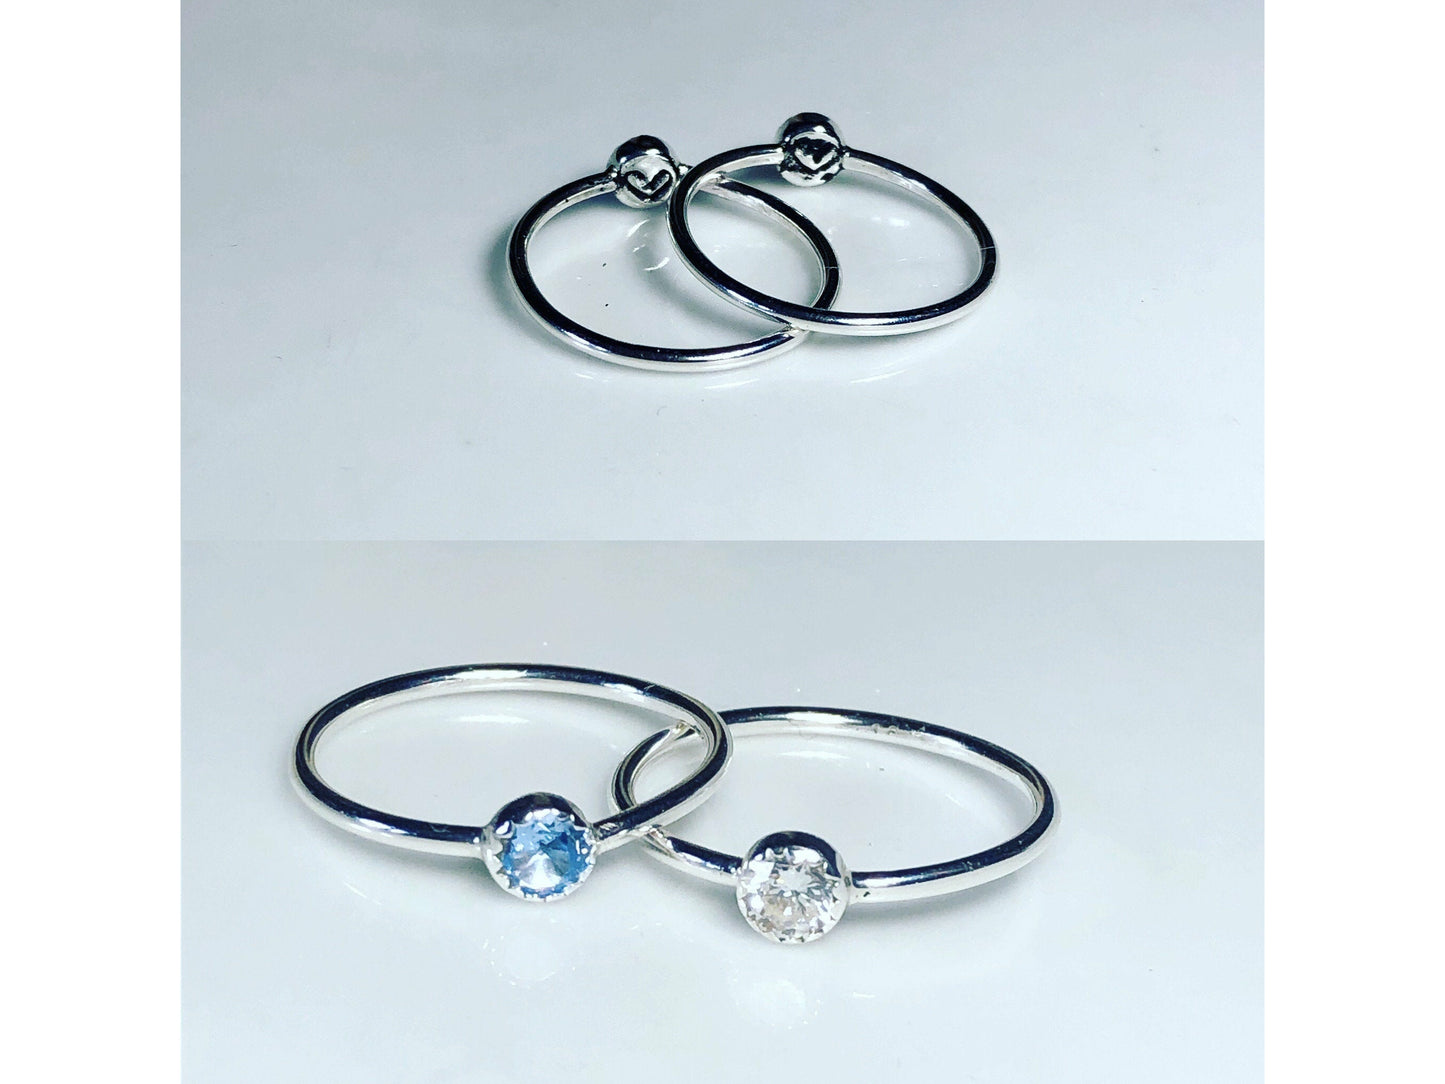 sterling-silver-dainty-rings-silver-stackable-rings-gemstone-jewelry-gifts-for-her-dainty-rings-bridesmaid-gift-modern-jewelry-heart-ring